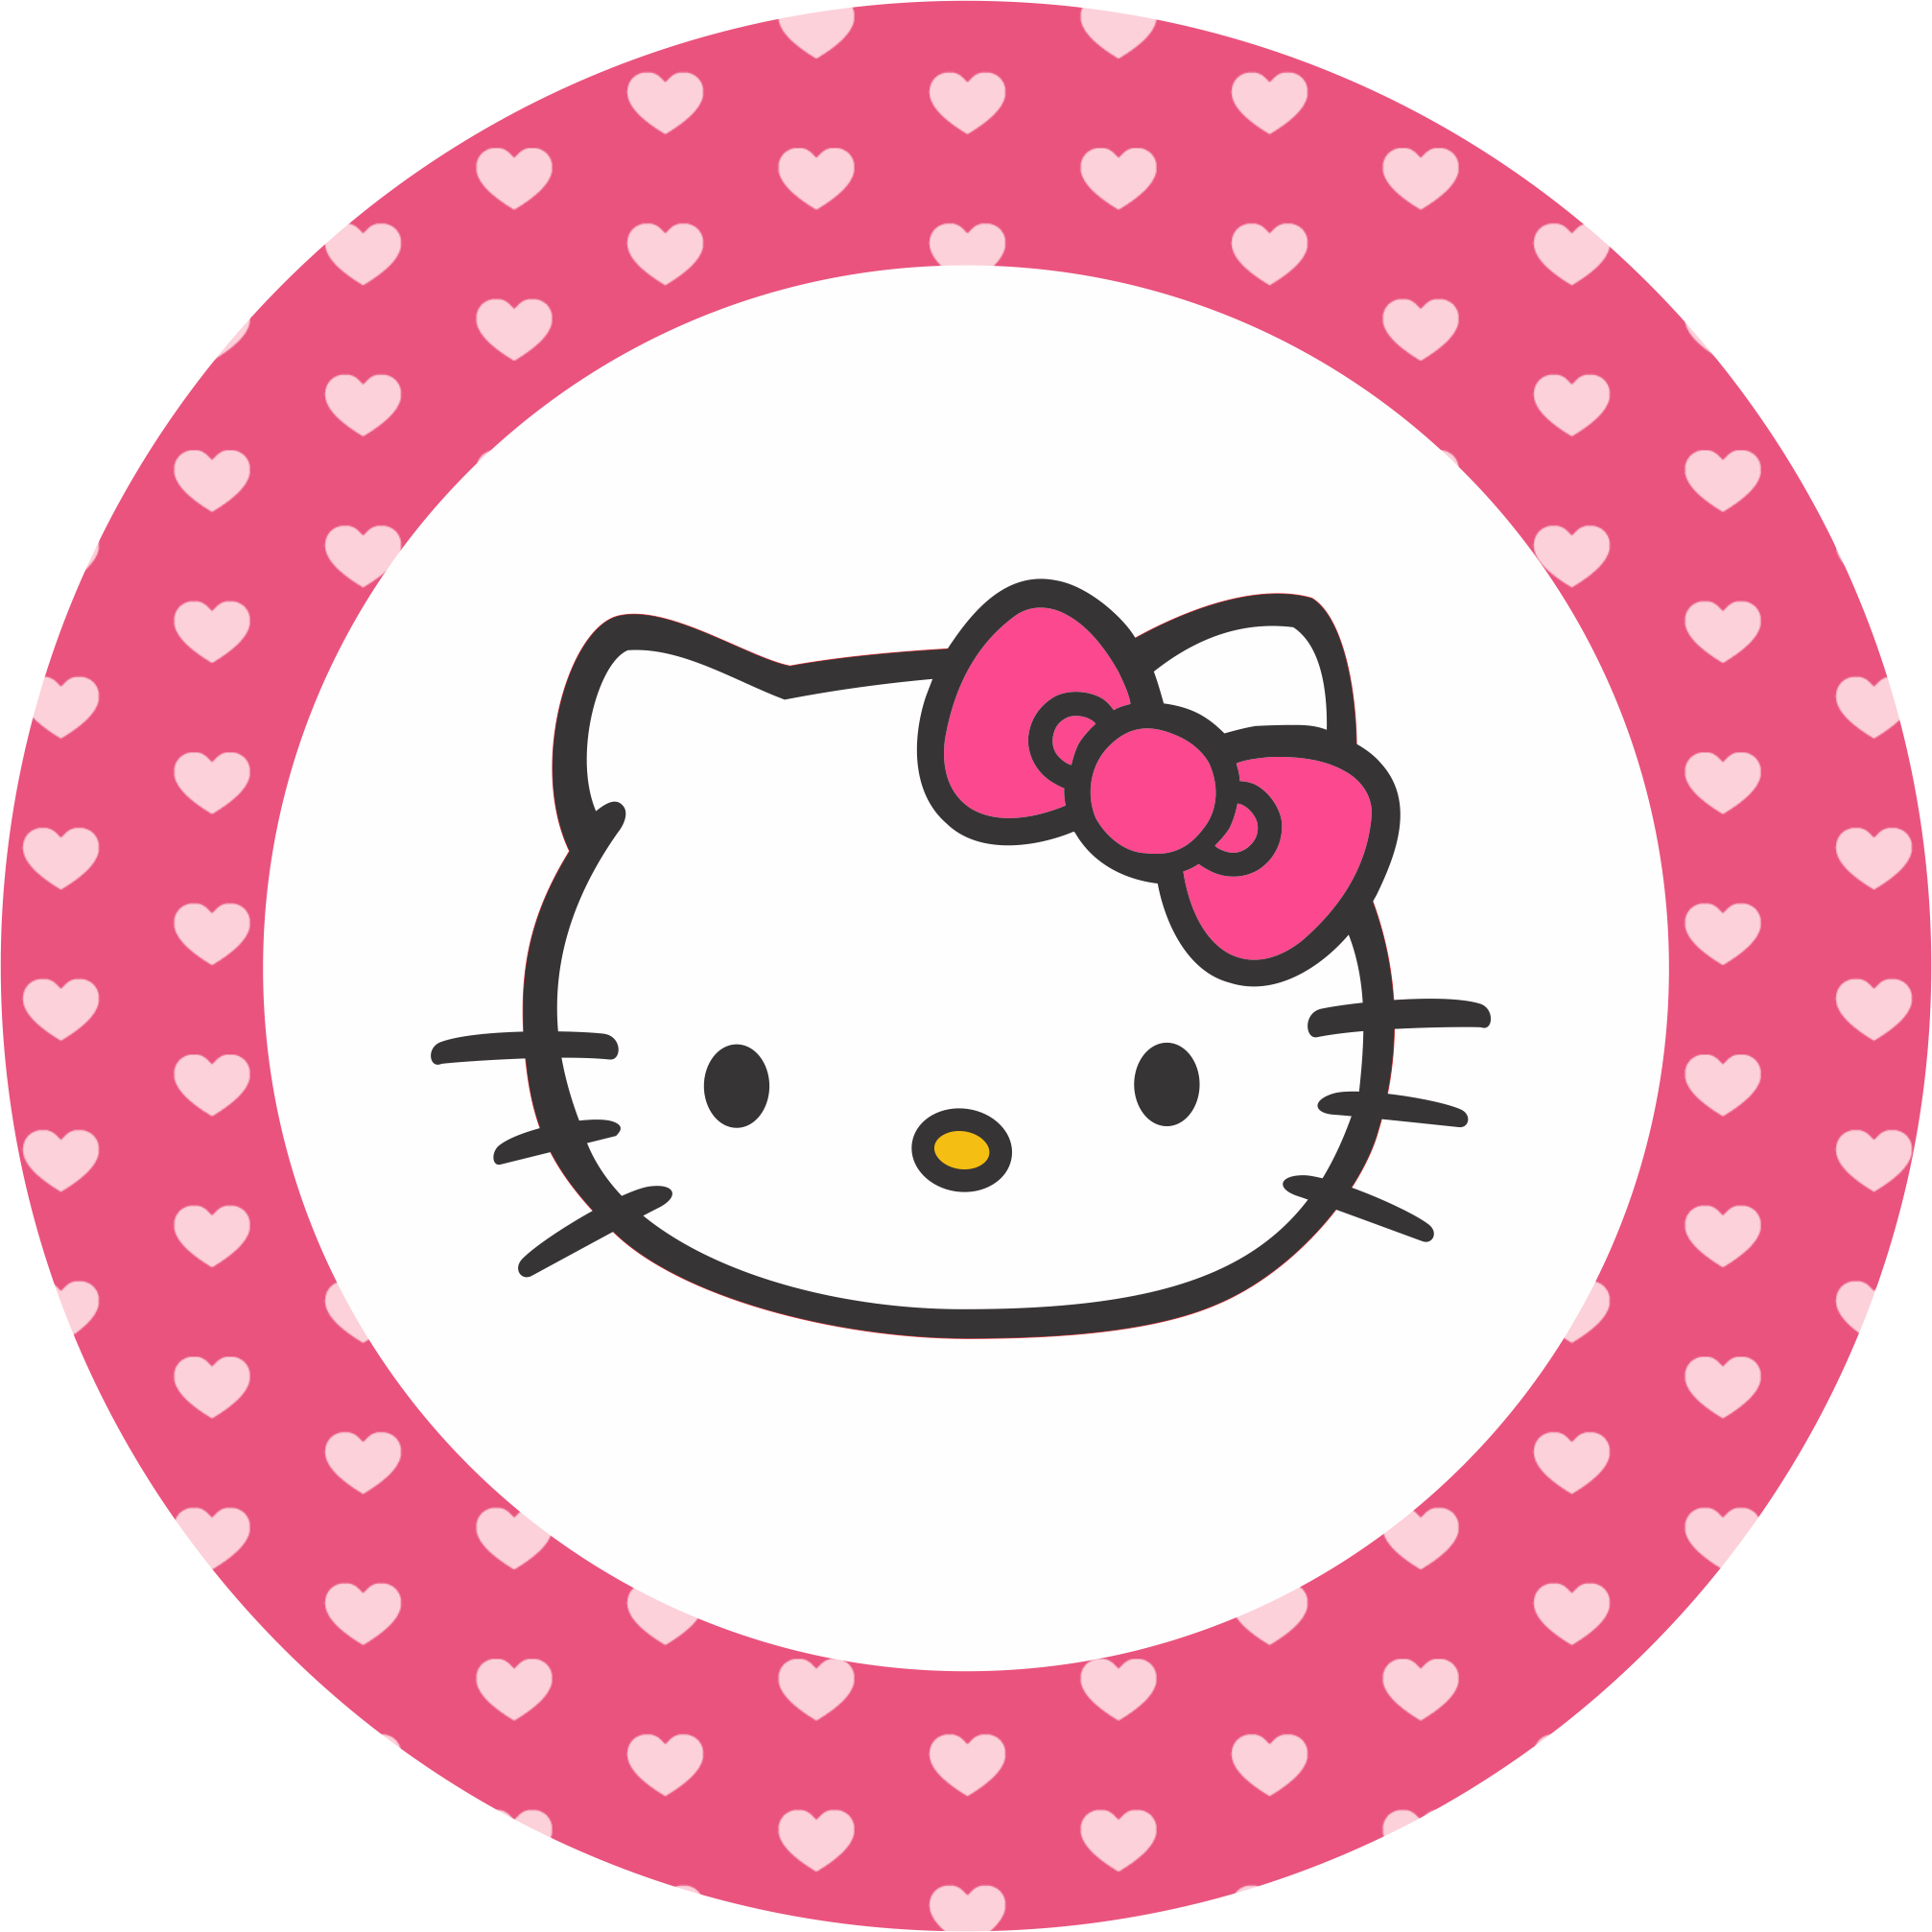 clocks clipart hello kitty clocks hello kitty transparent free for download on webstockreview 2020 clocks clipart hello kitty clocks